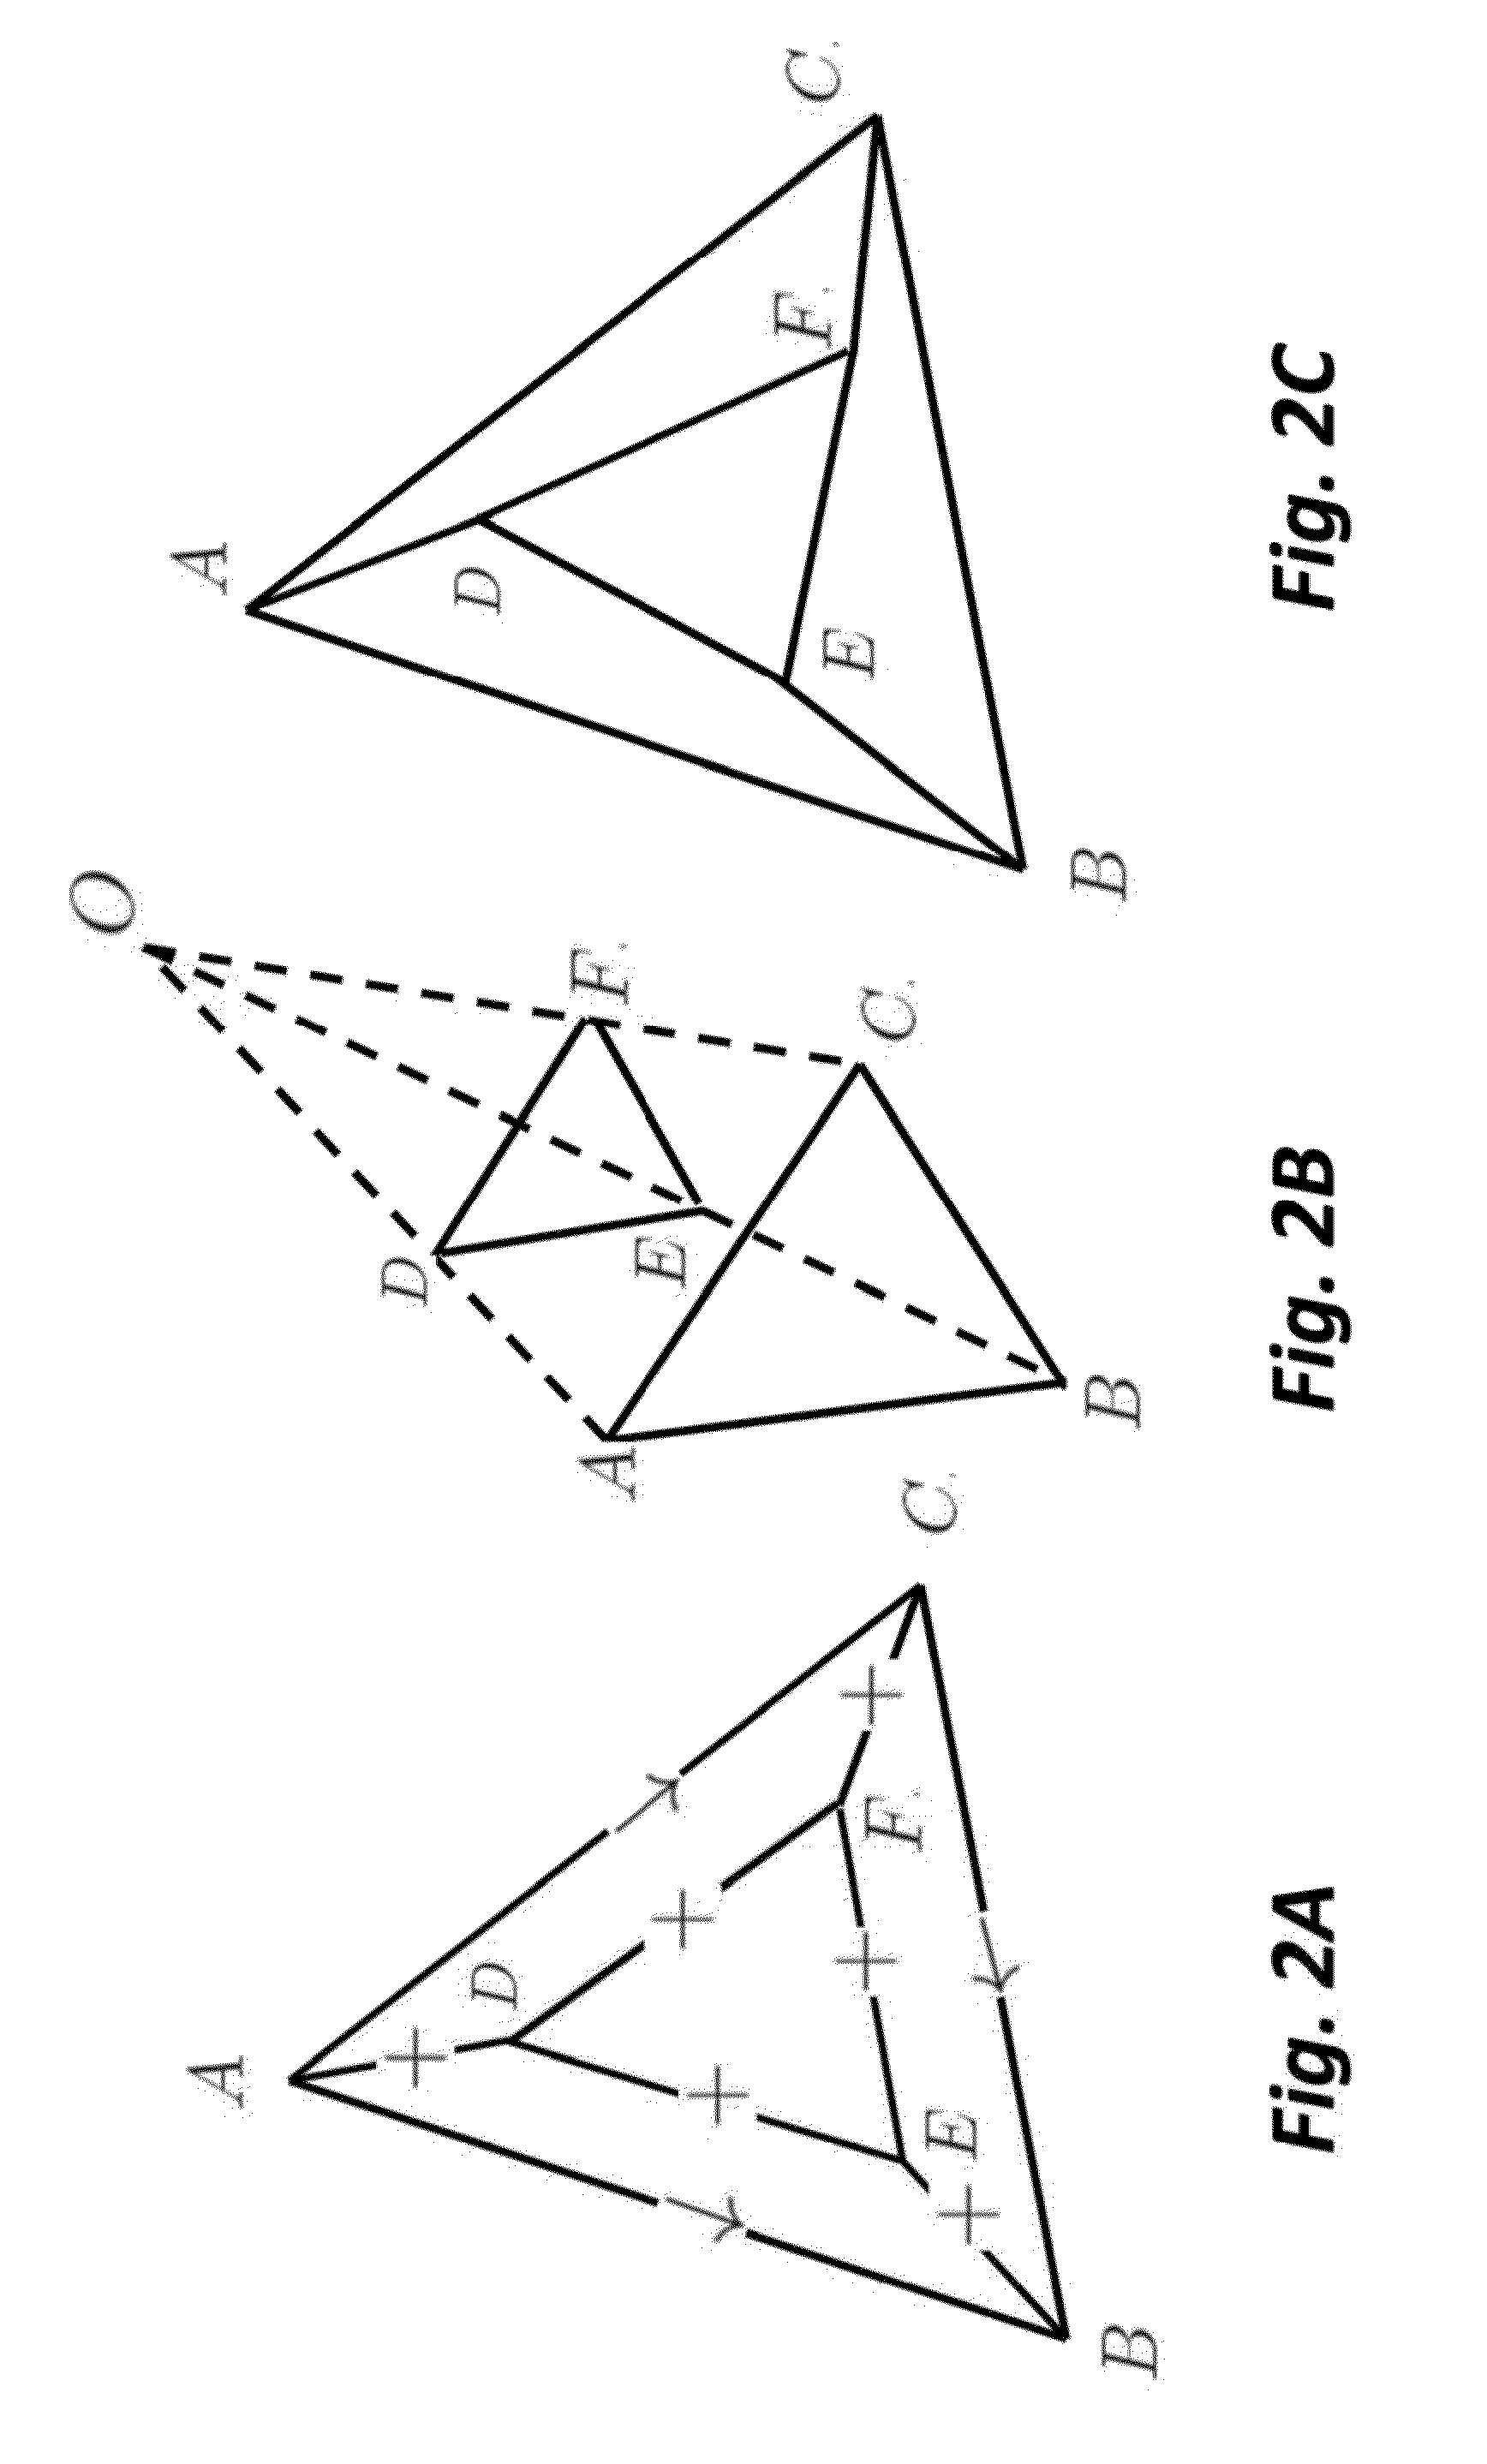 Method for reconstructing 3D lines from 2D lines in an image